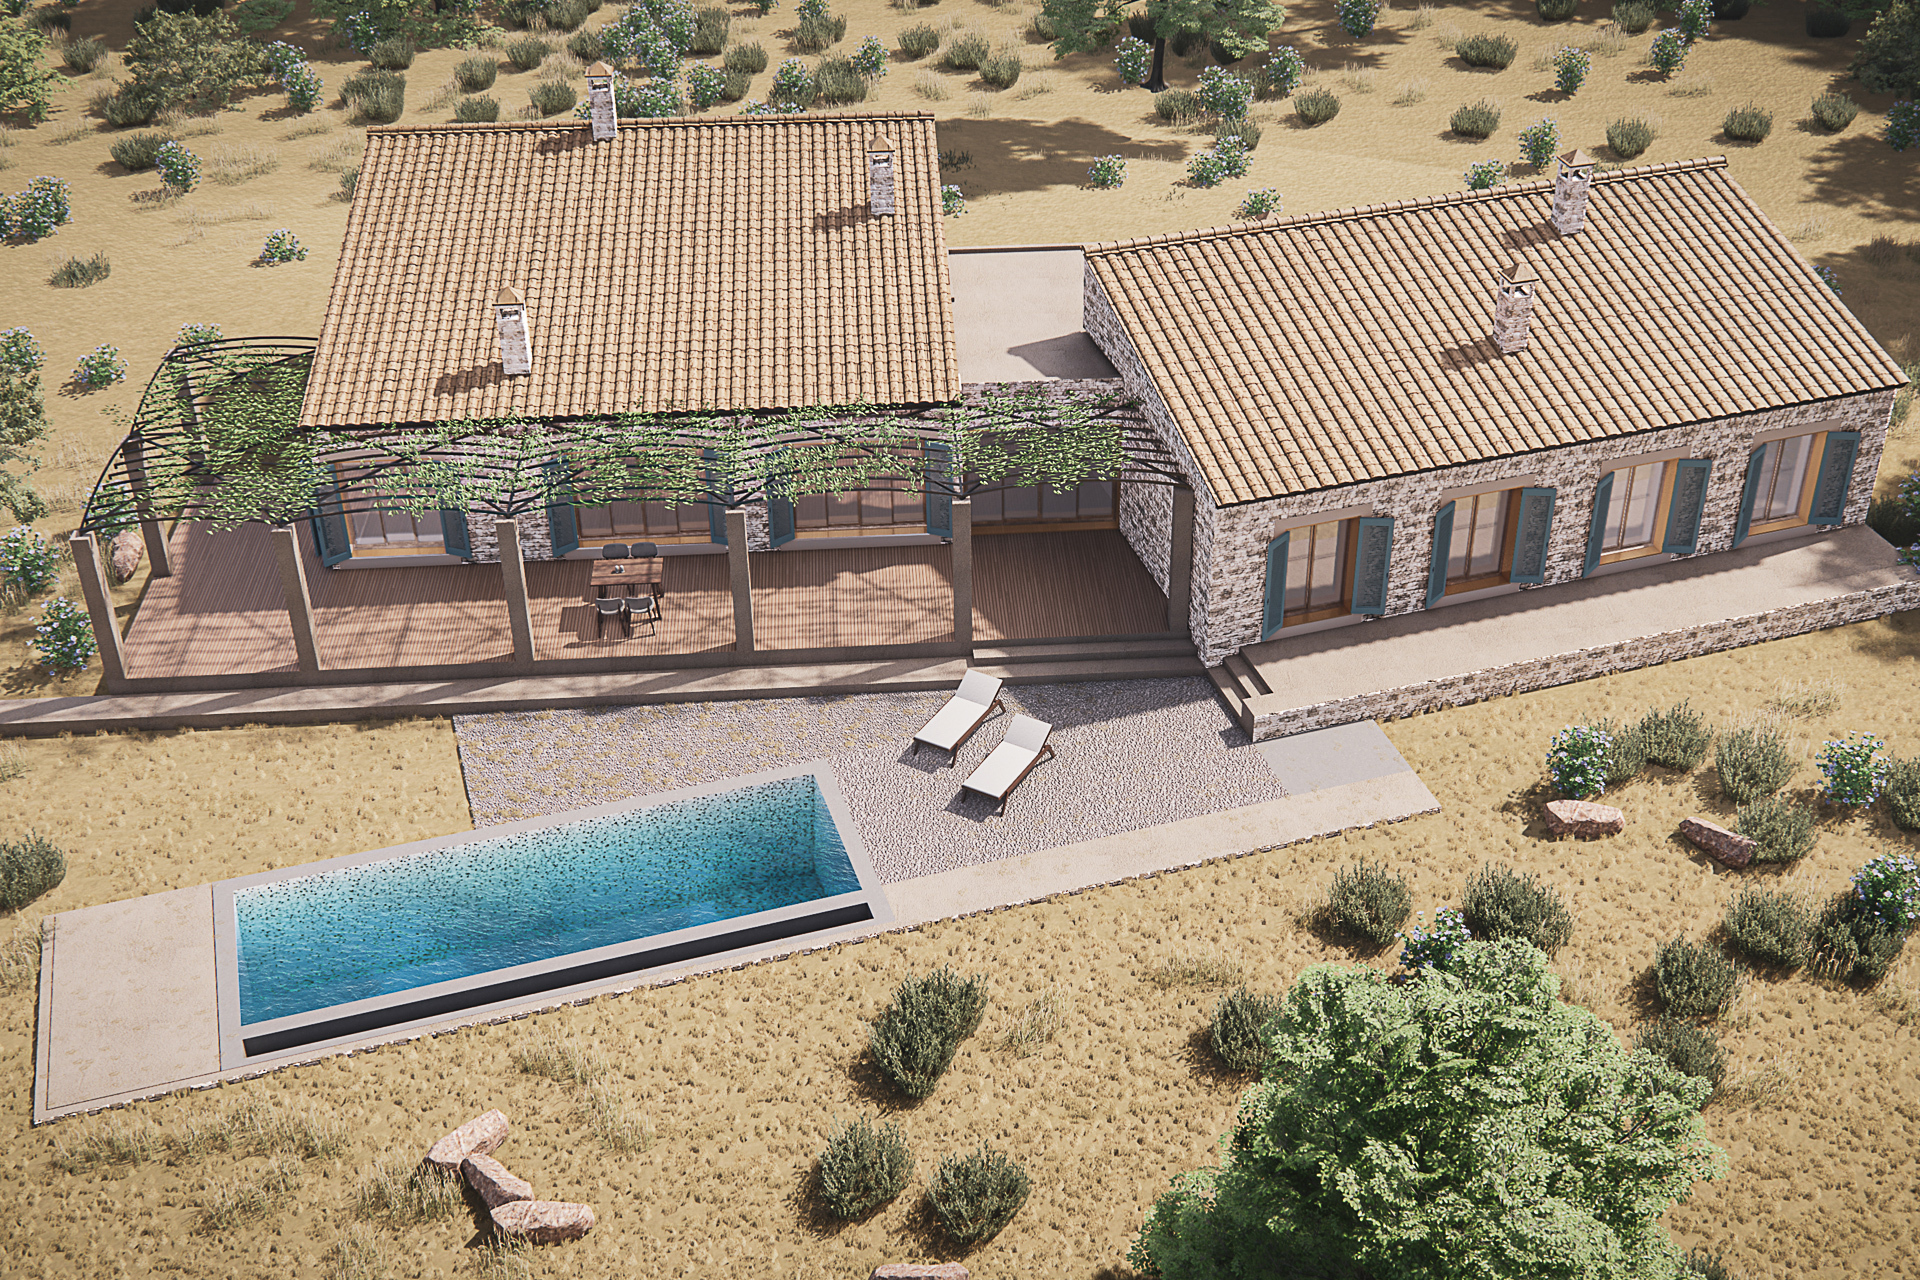 With execution project: Paradisiacal, large plot near Capdepera with magnificent panoramic views, 07580 Capdepera (Spain), Residential plot